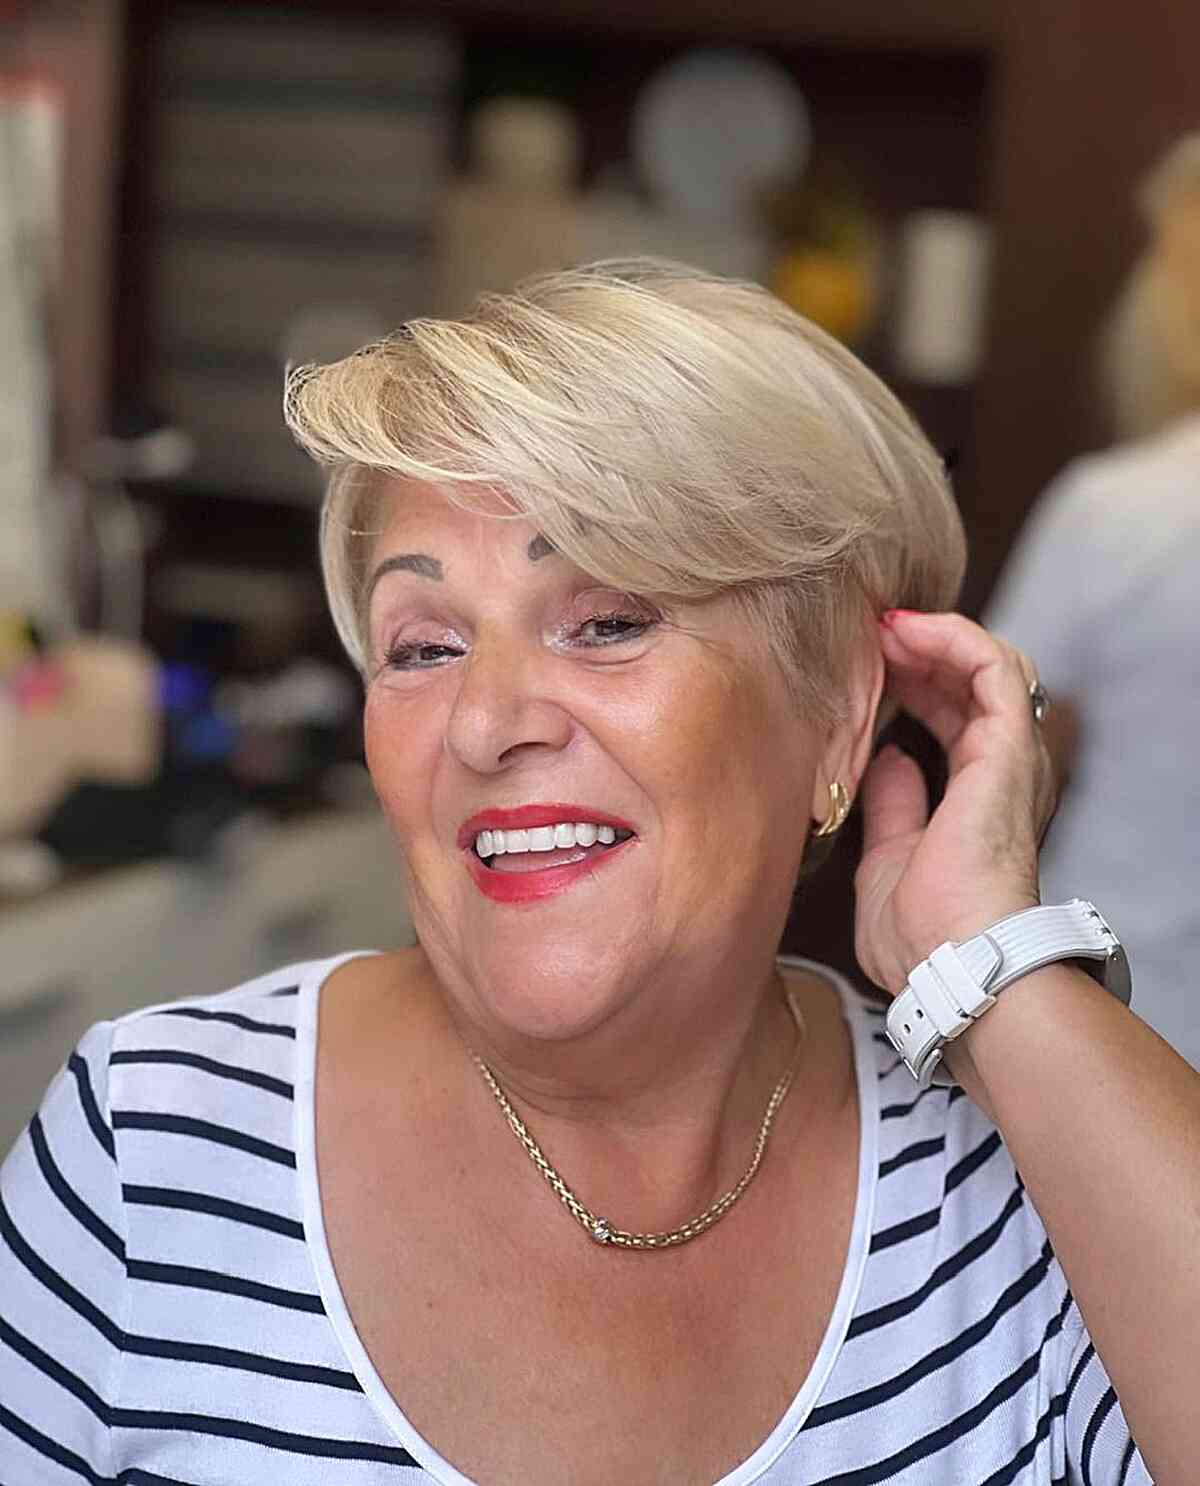 Long Pixie Blonde Hair with Side-Swept Bangs for Women Aged 70